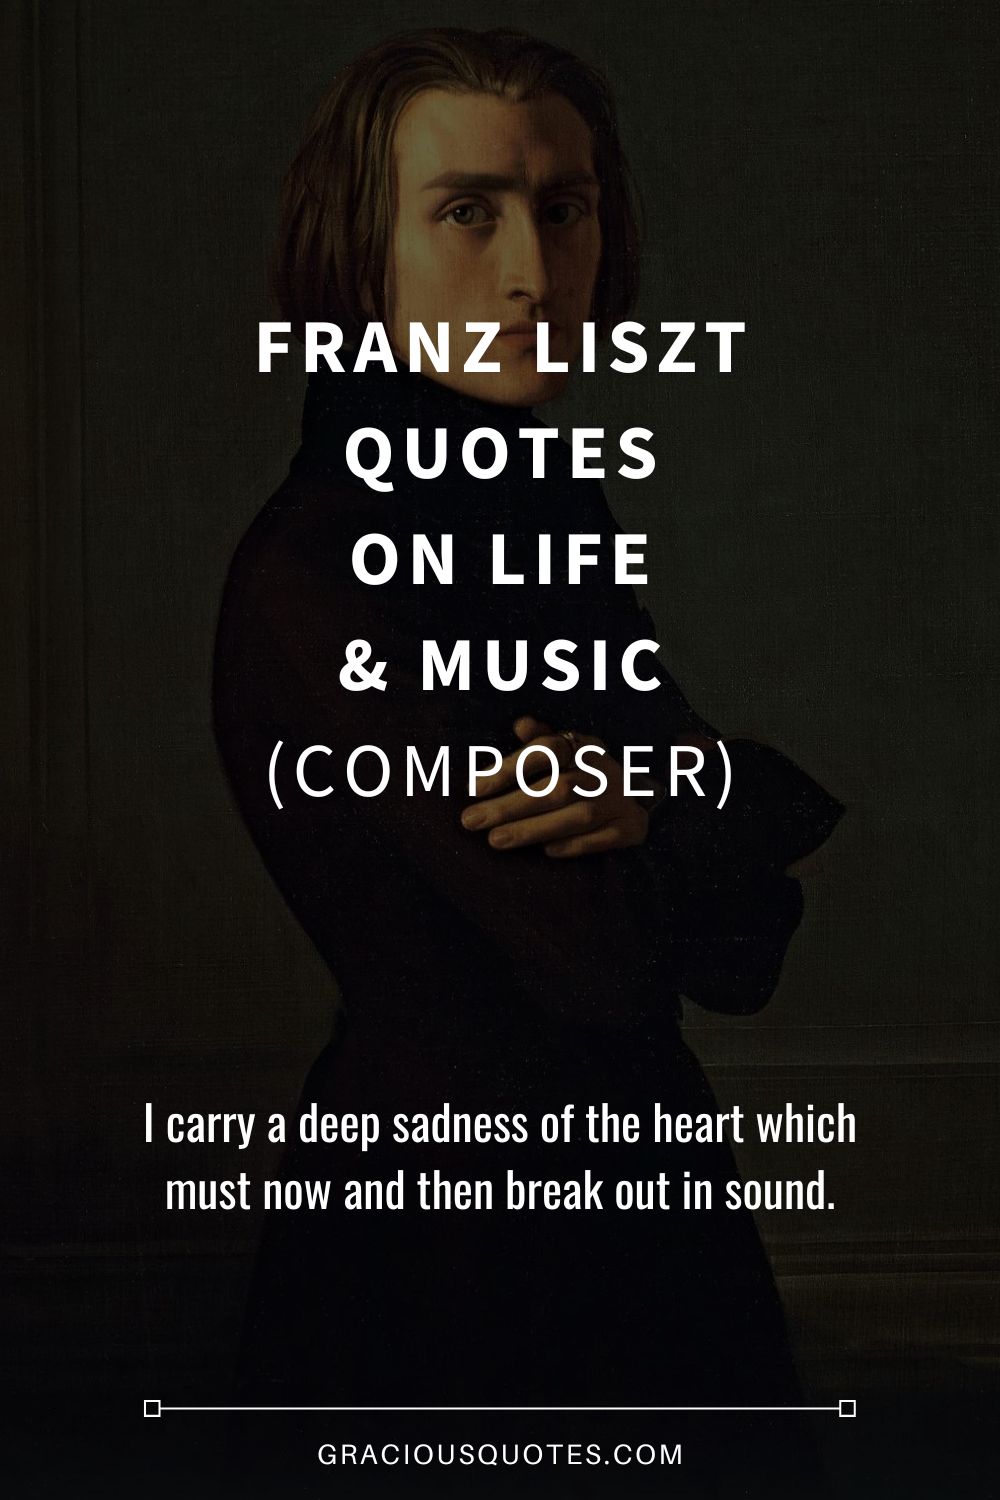 Franz Liszt Quotes on Life & Music (COMPOSER) - Gracious Quotes